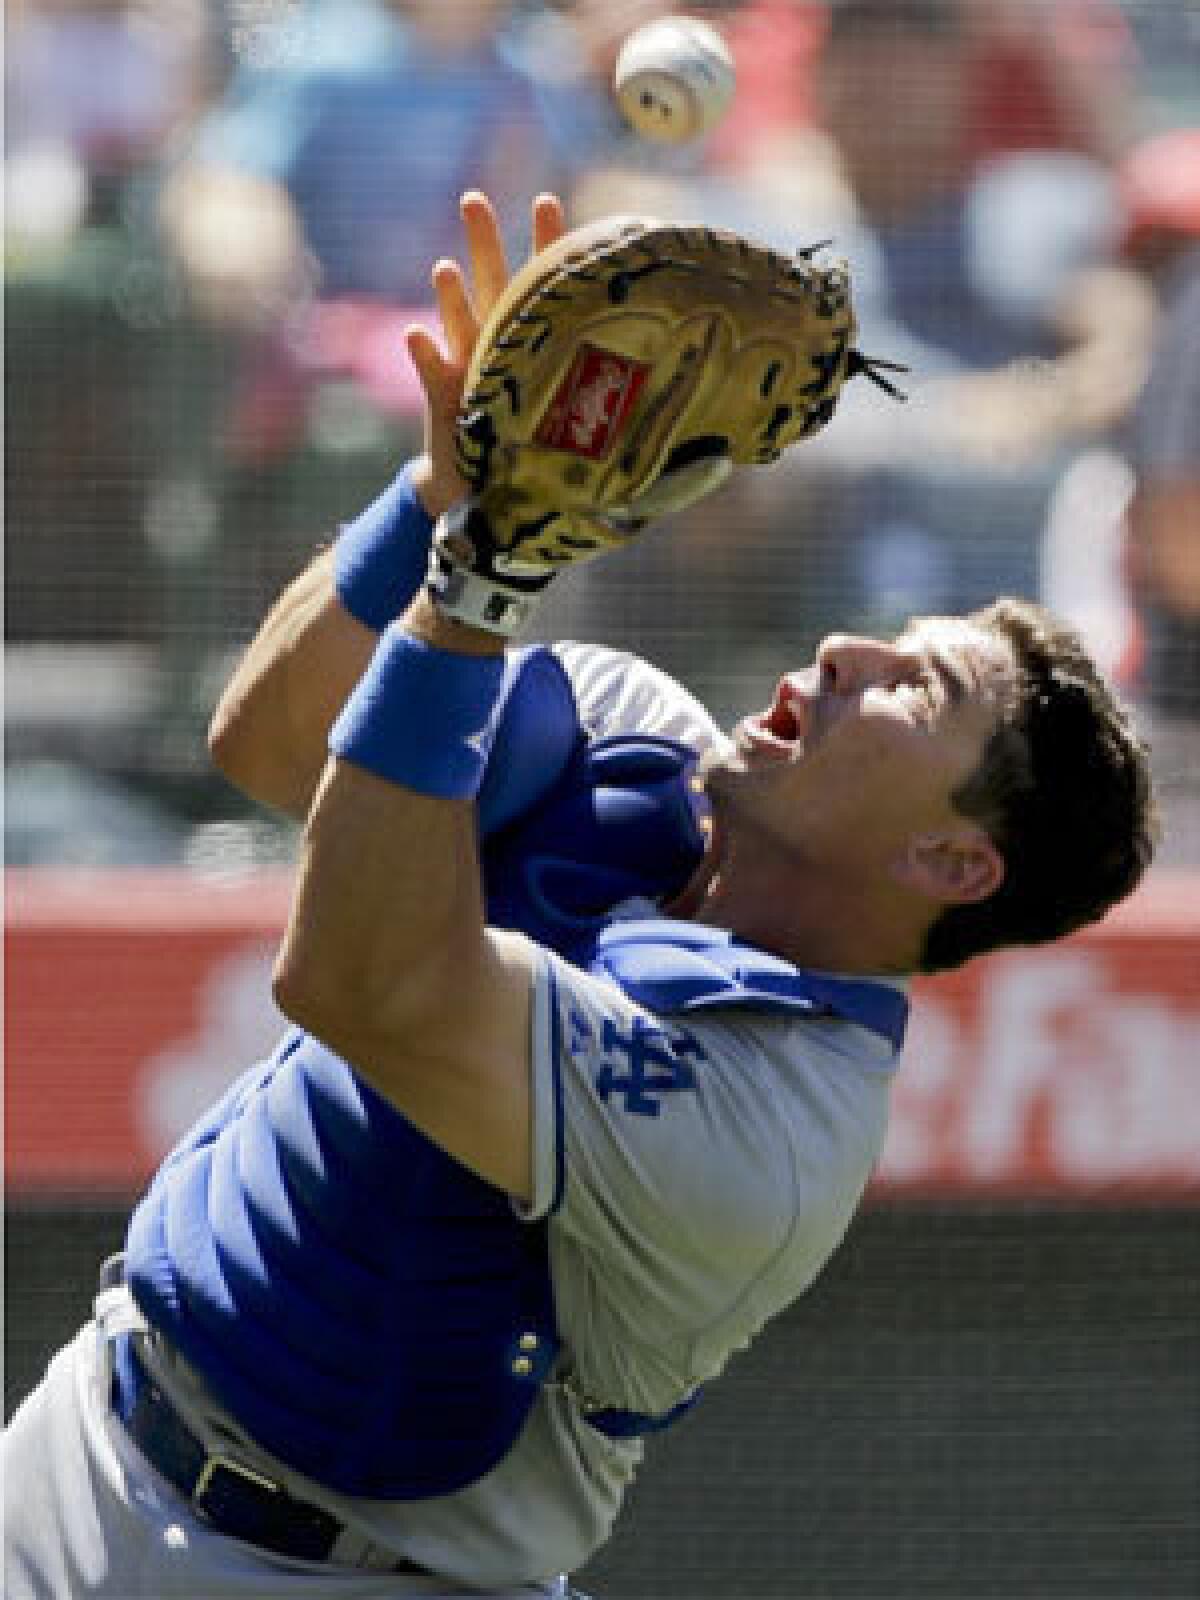 Dodgers backup catcher Matt Treanor finished the season with a .175 batting average and 10 RBIs in 103 at-bats.